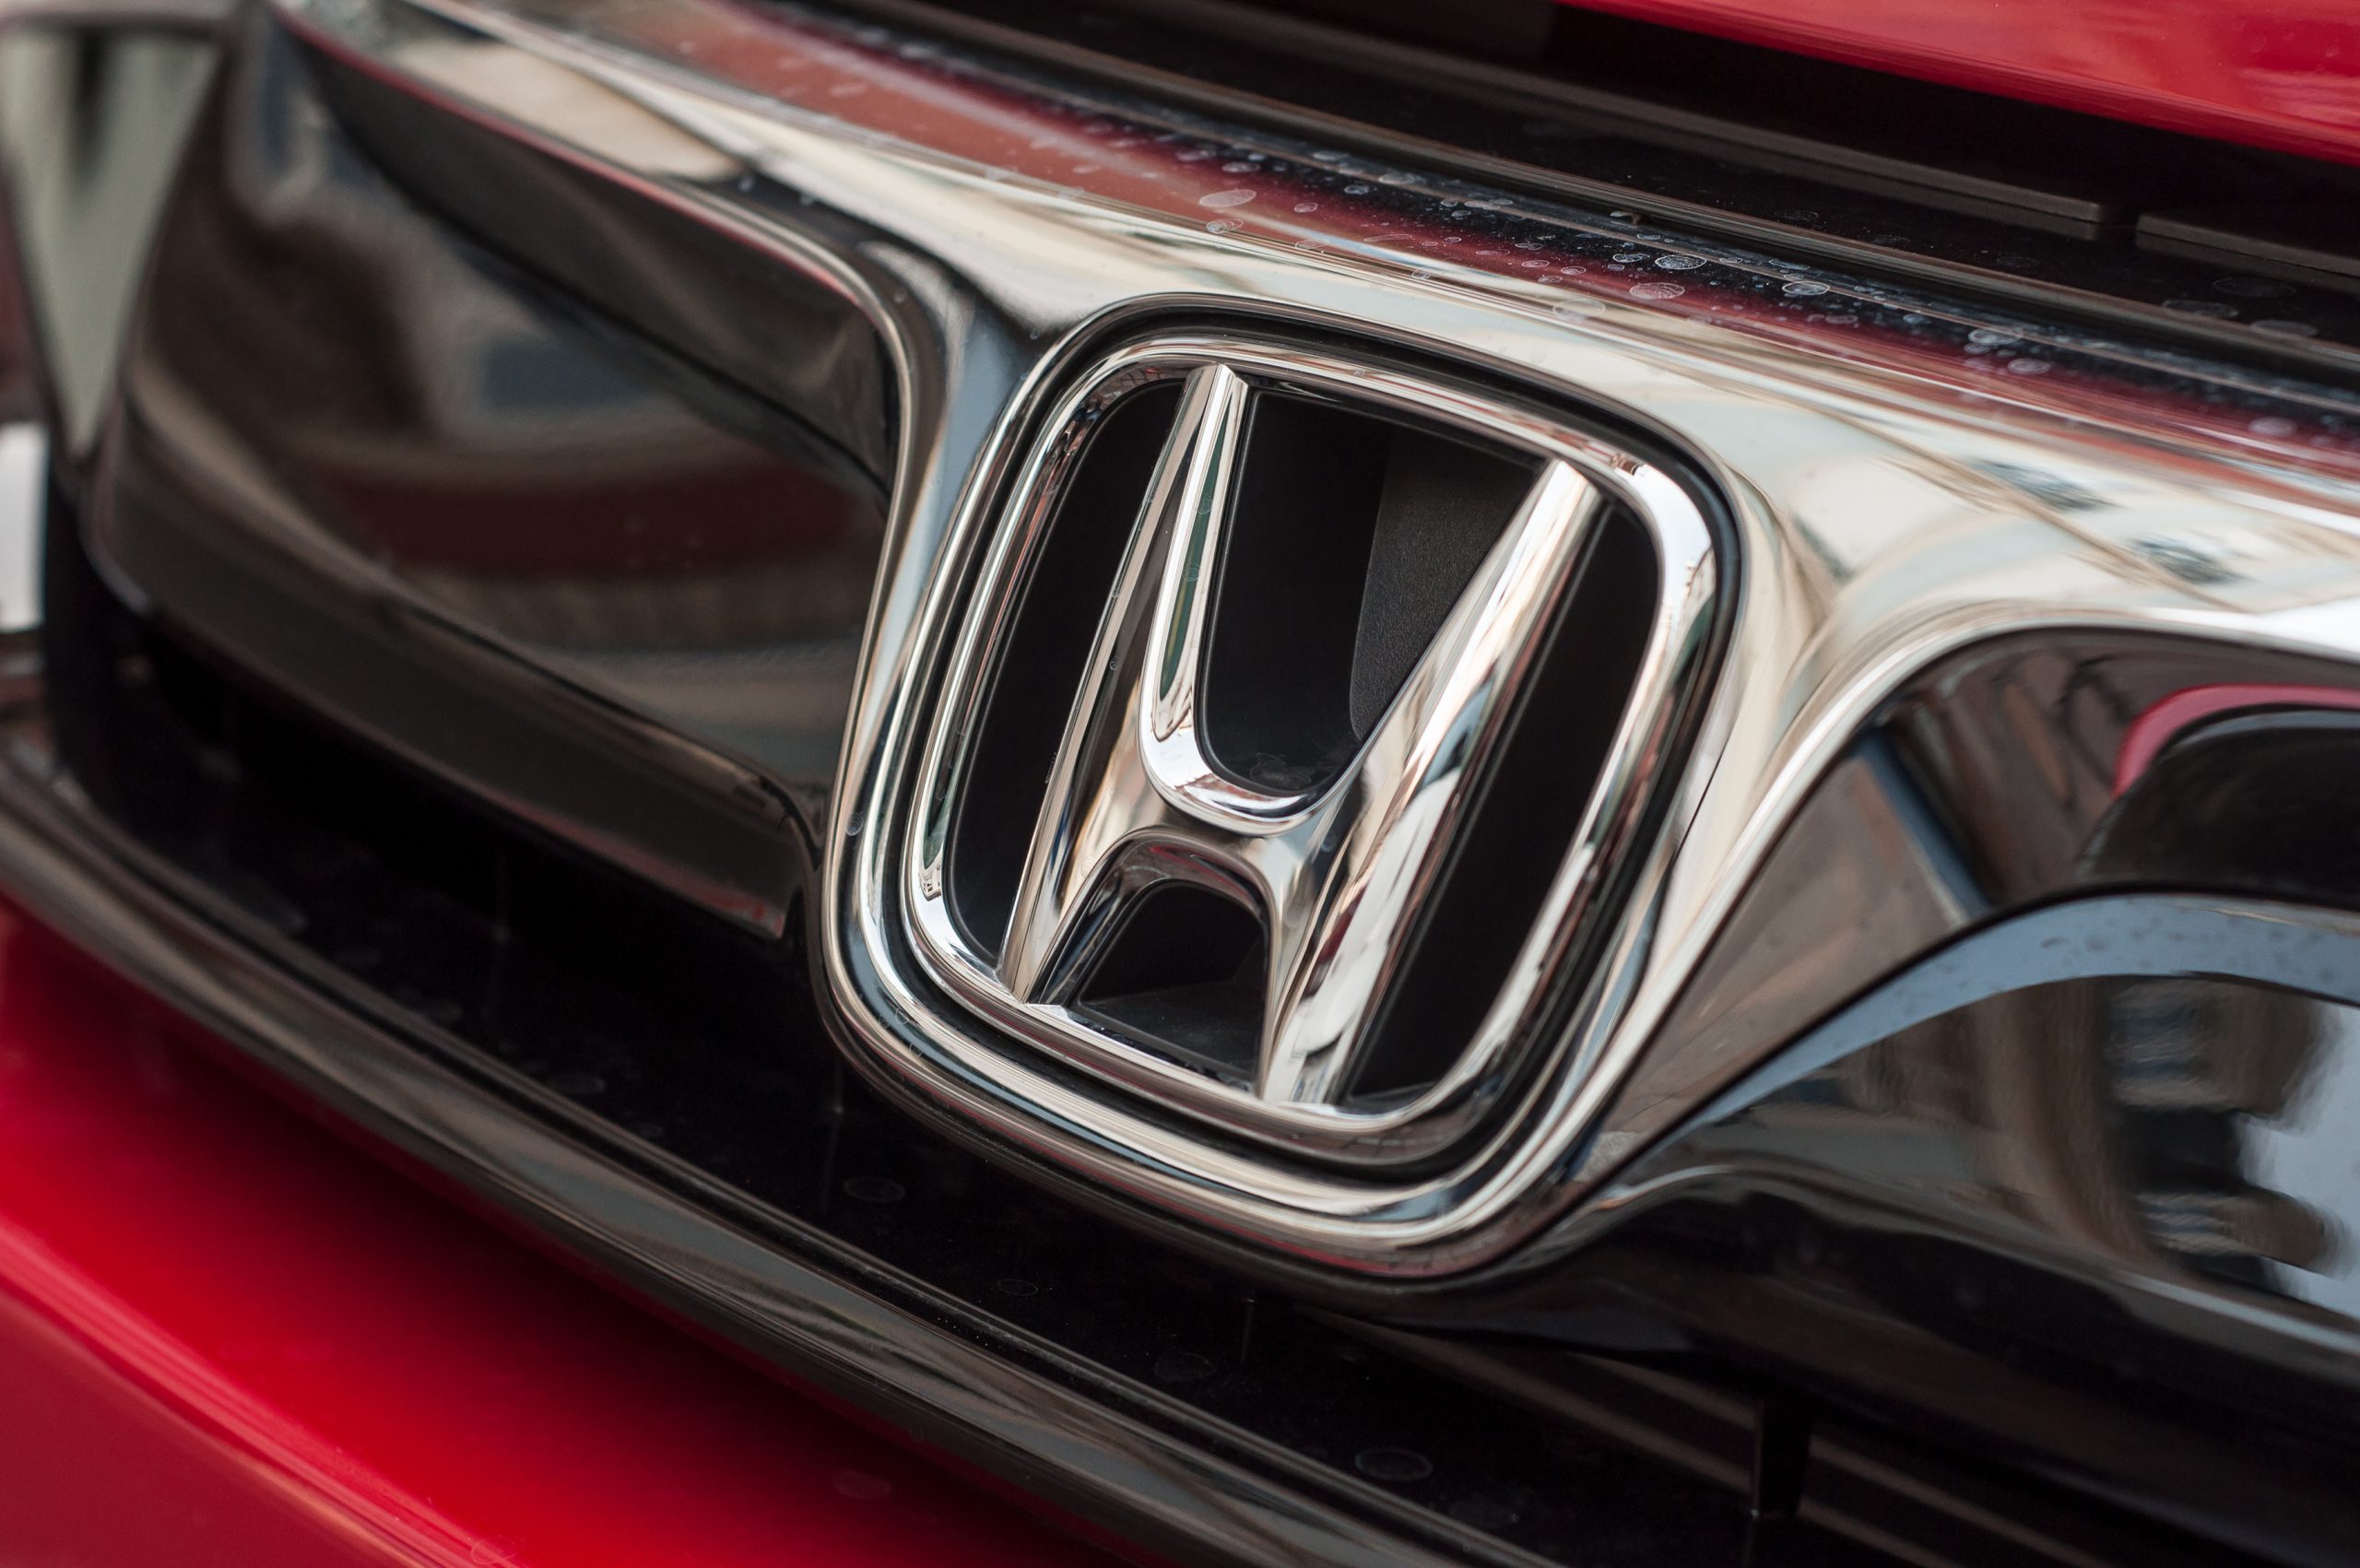 A lawsuit claims certain Honda vehicles have infotainment system and phantom braking issues